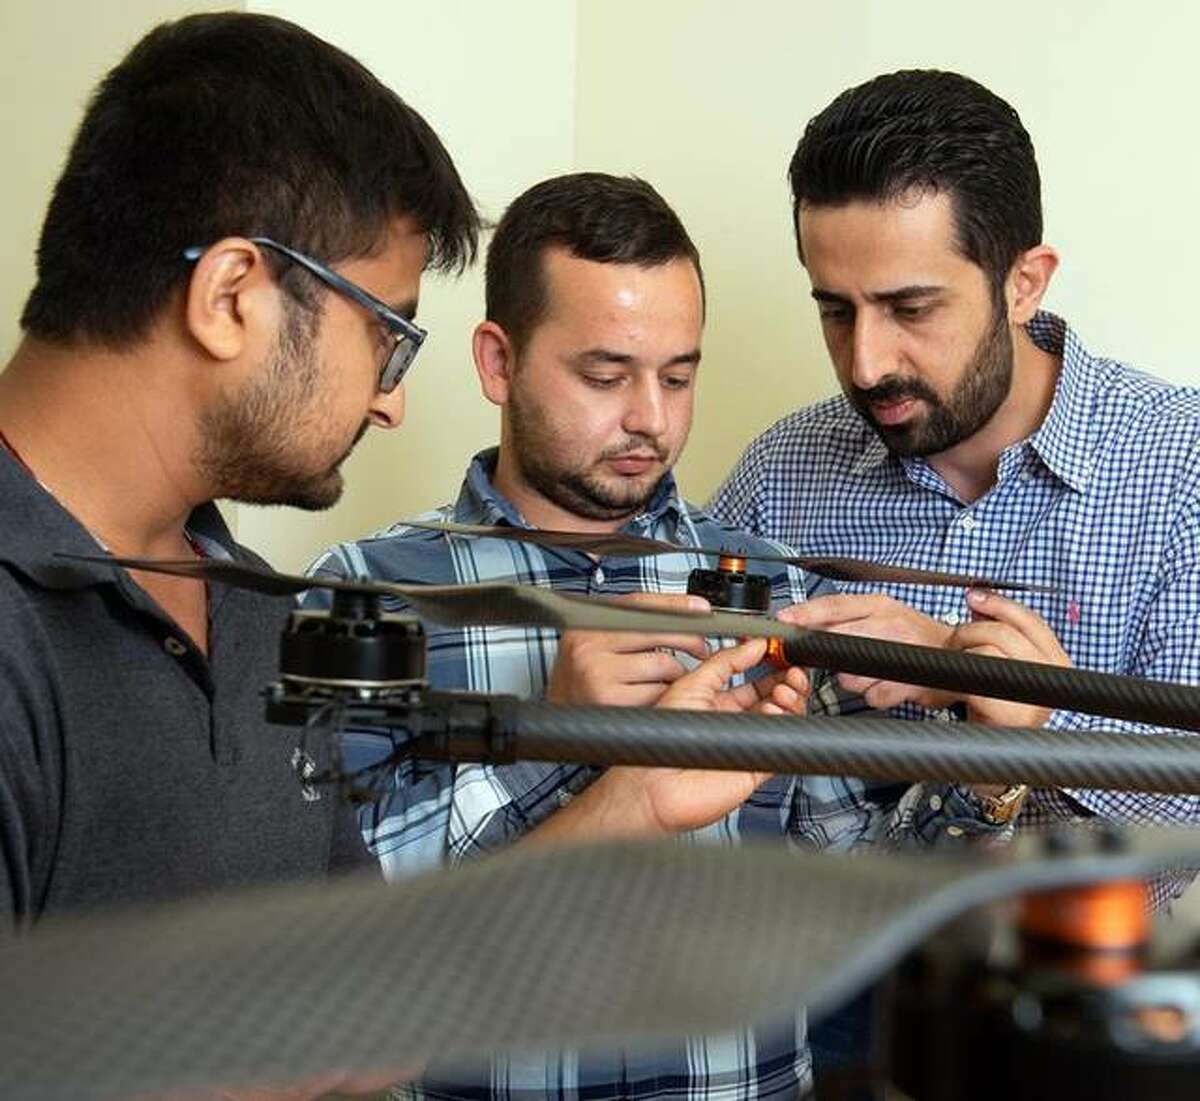 SIUE School of Engineering’s Nima Lotfi, PhD, (back) and his students Nedret Ramic (middle), a mechanical engineering graduate student, and Pratik Lamsal, a senior mechanical engineering major, assemble a large drone. Lotfi is the faculty advisor for the Drone Club of SIUE.